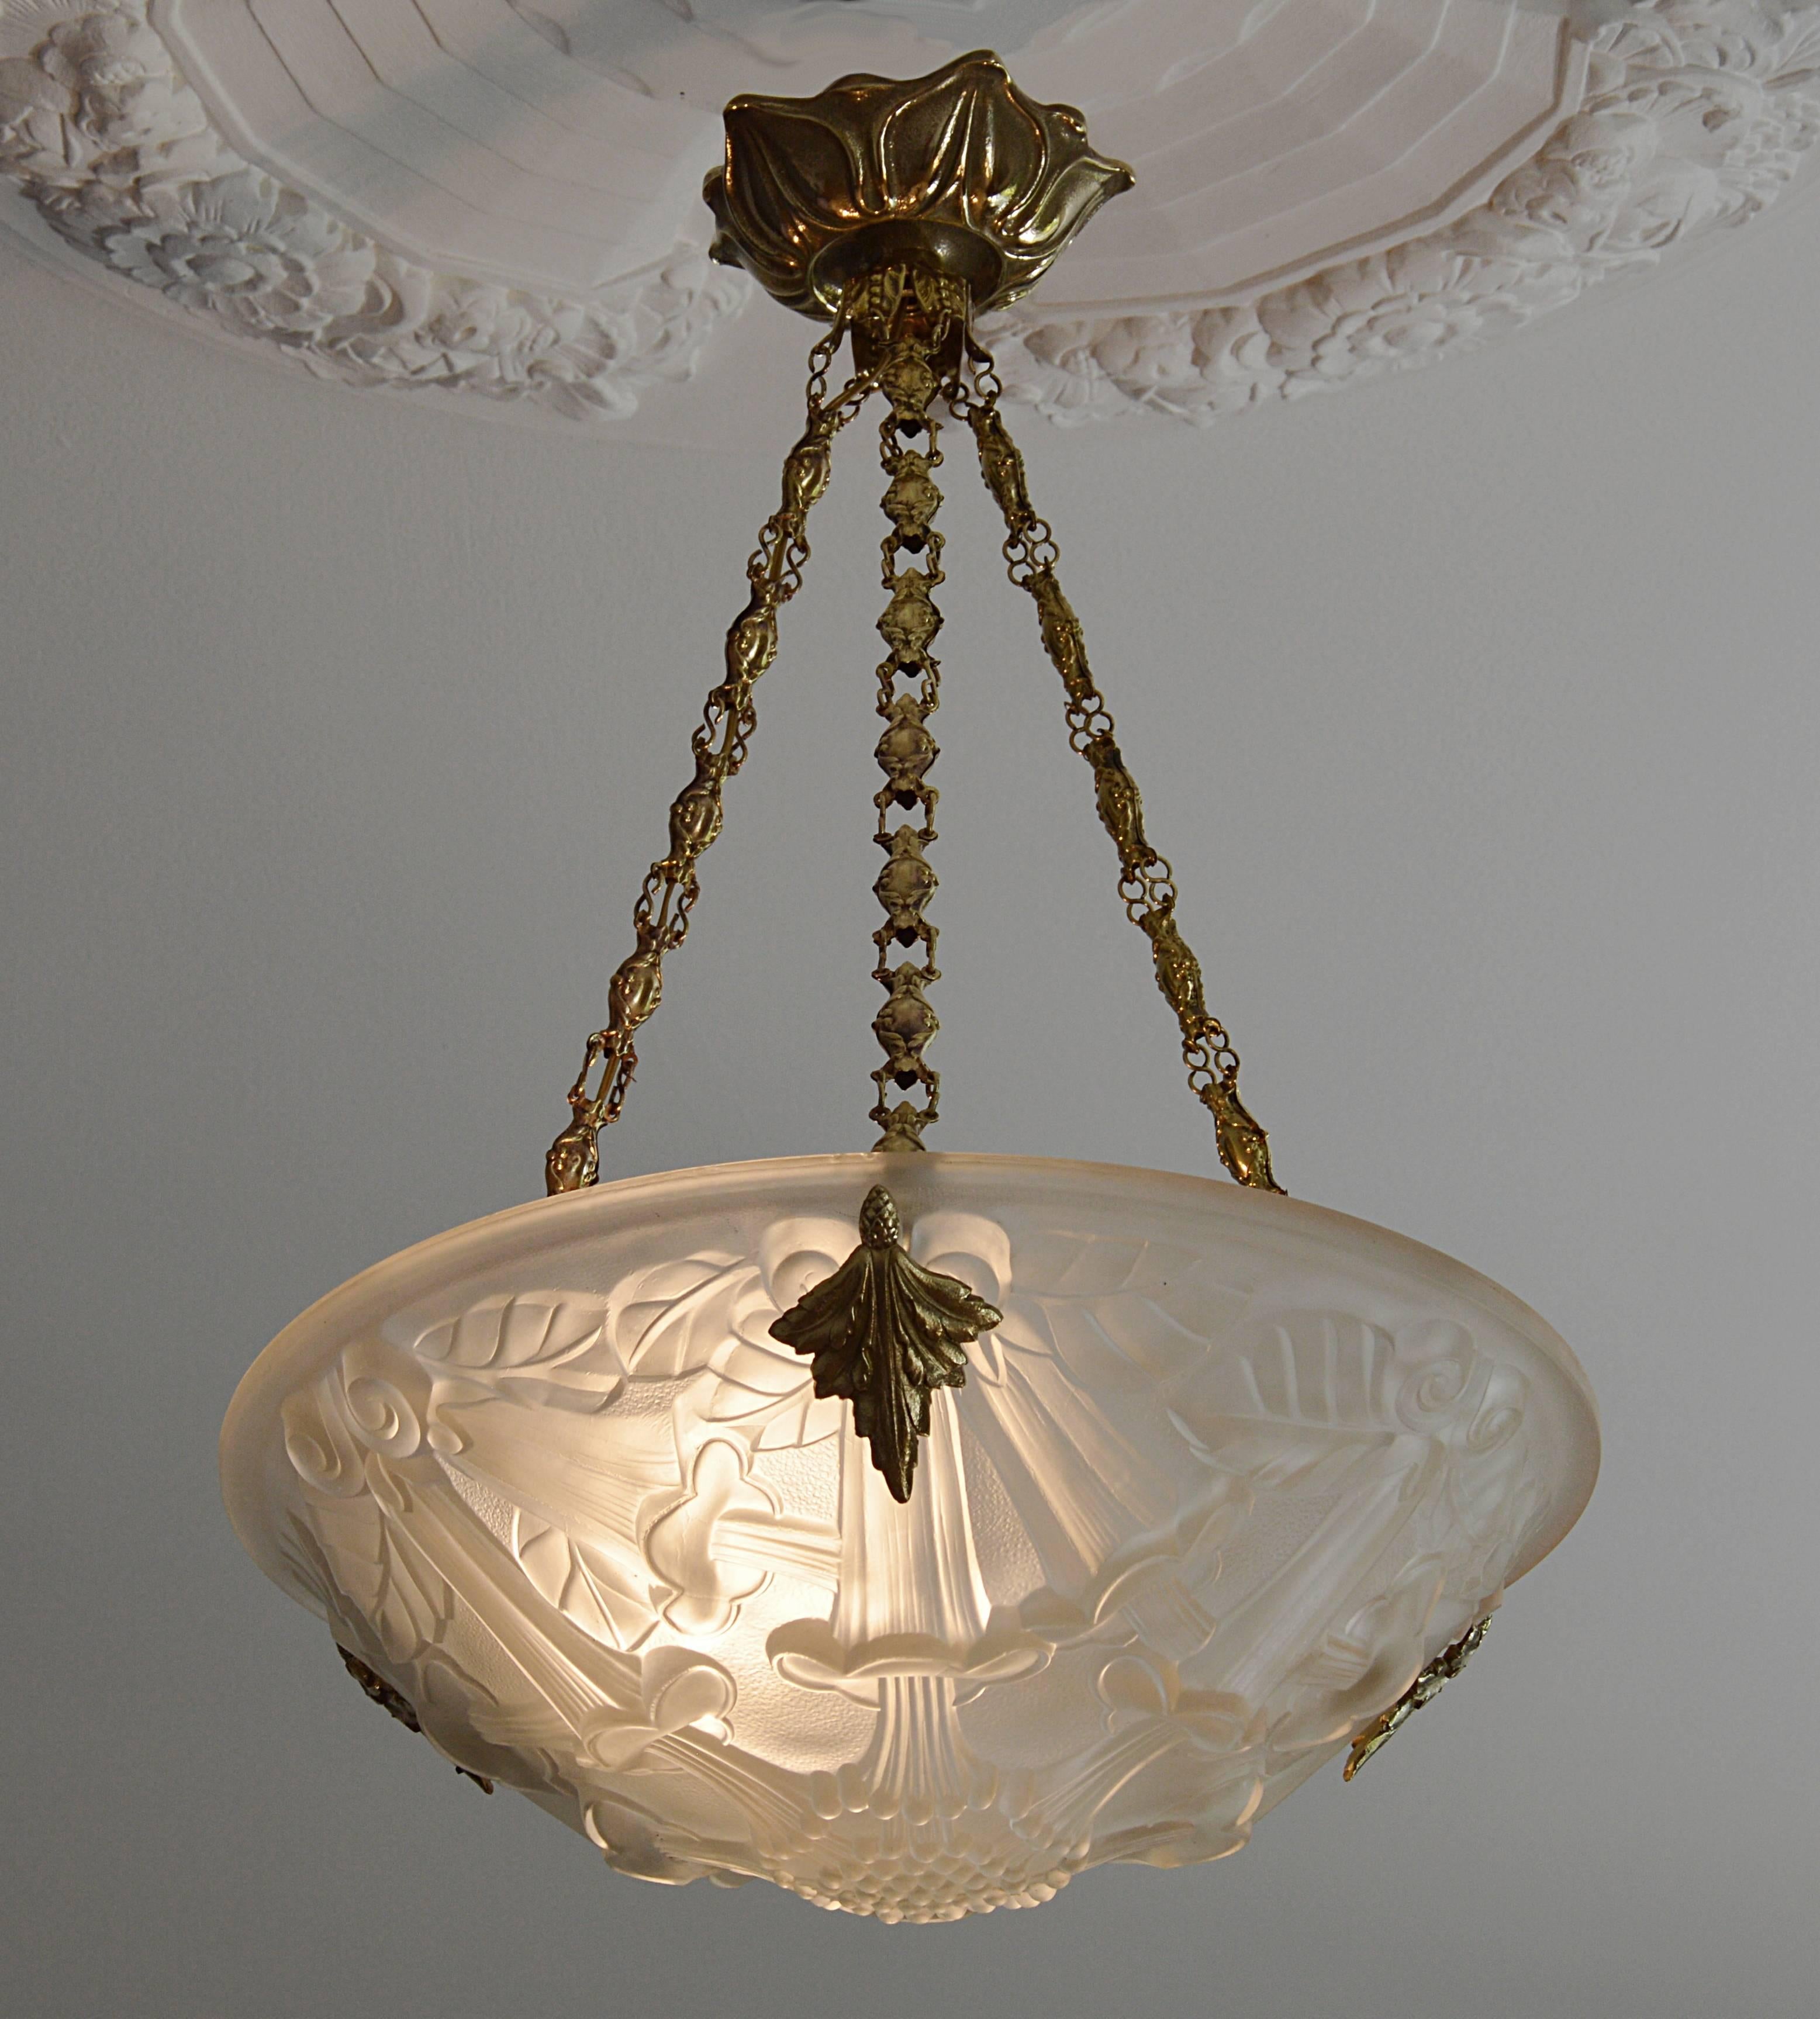 French Art Deco chandelier by Verrerie des Vosges, circa 1930. Molded glass shade with a trumpet vines creeper pattern. Solid bronze and gilt metal (links) fixture. Delivered wired for your country (US, EU, Australia, etc).